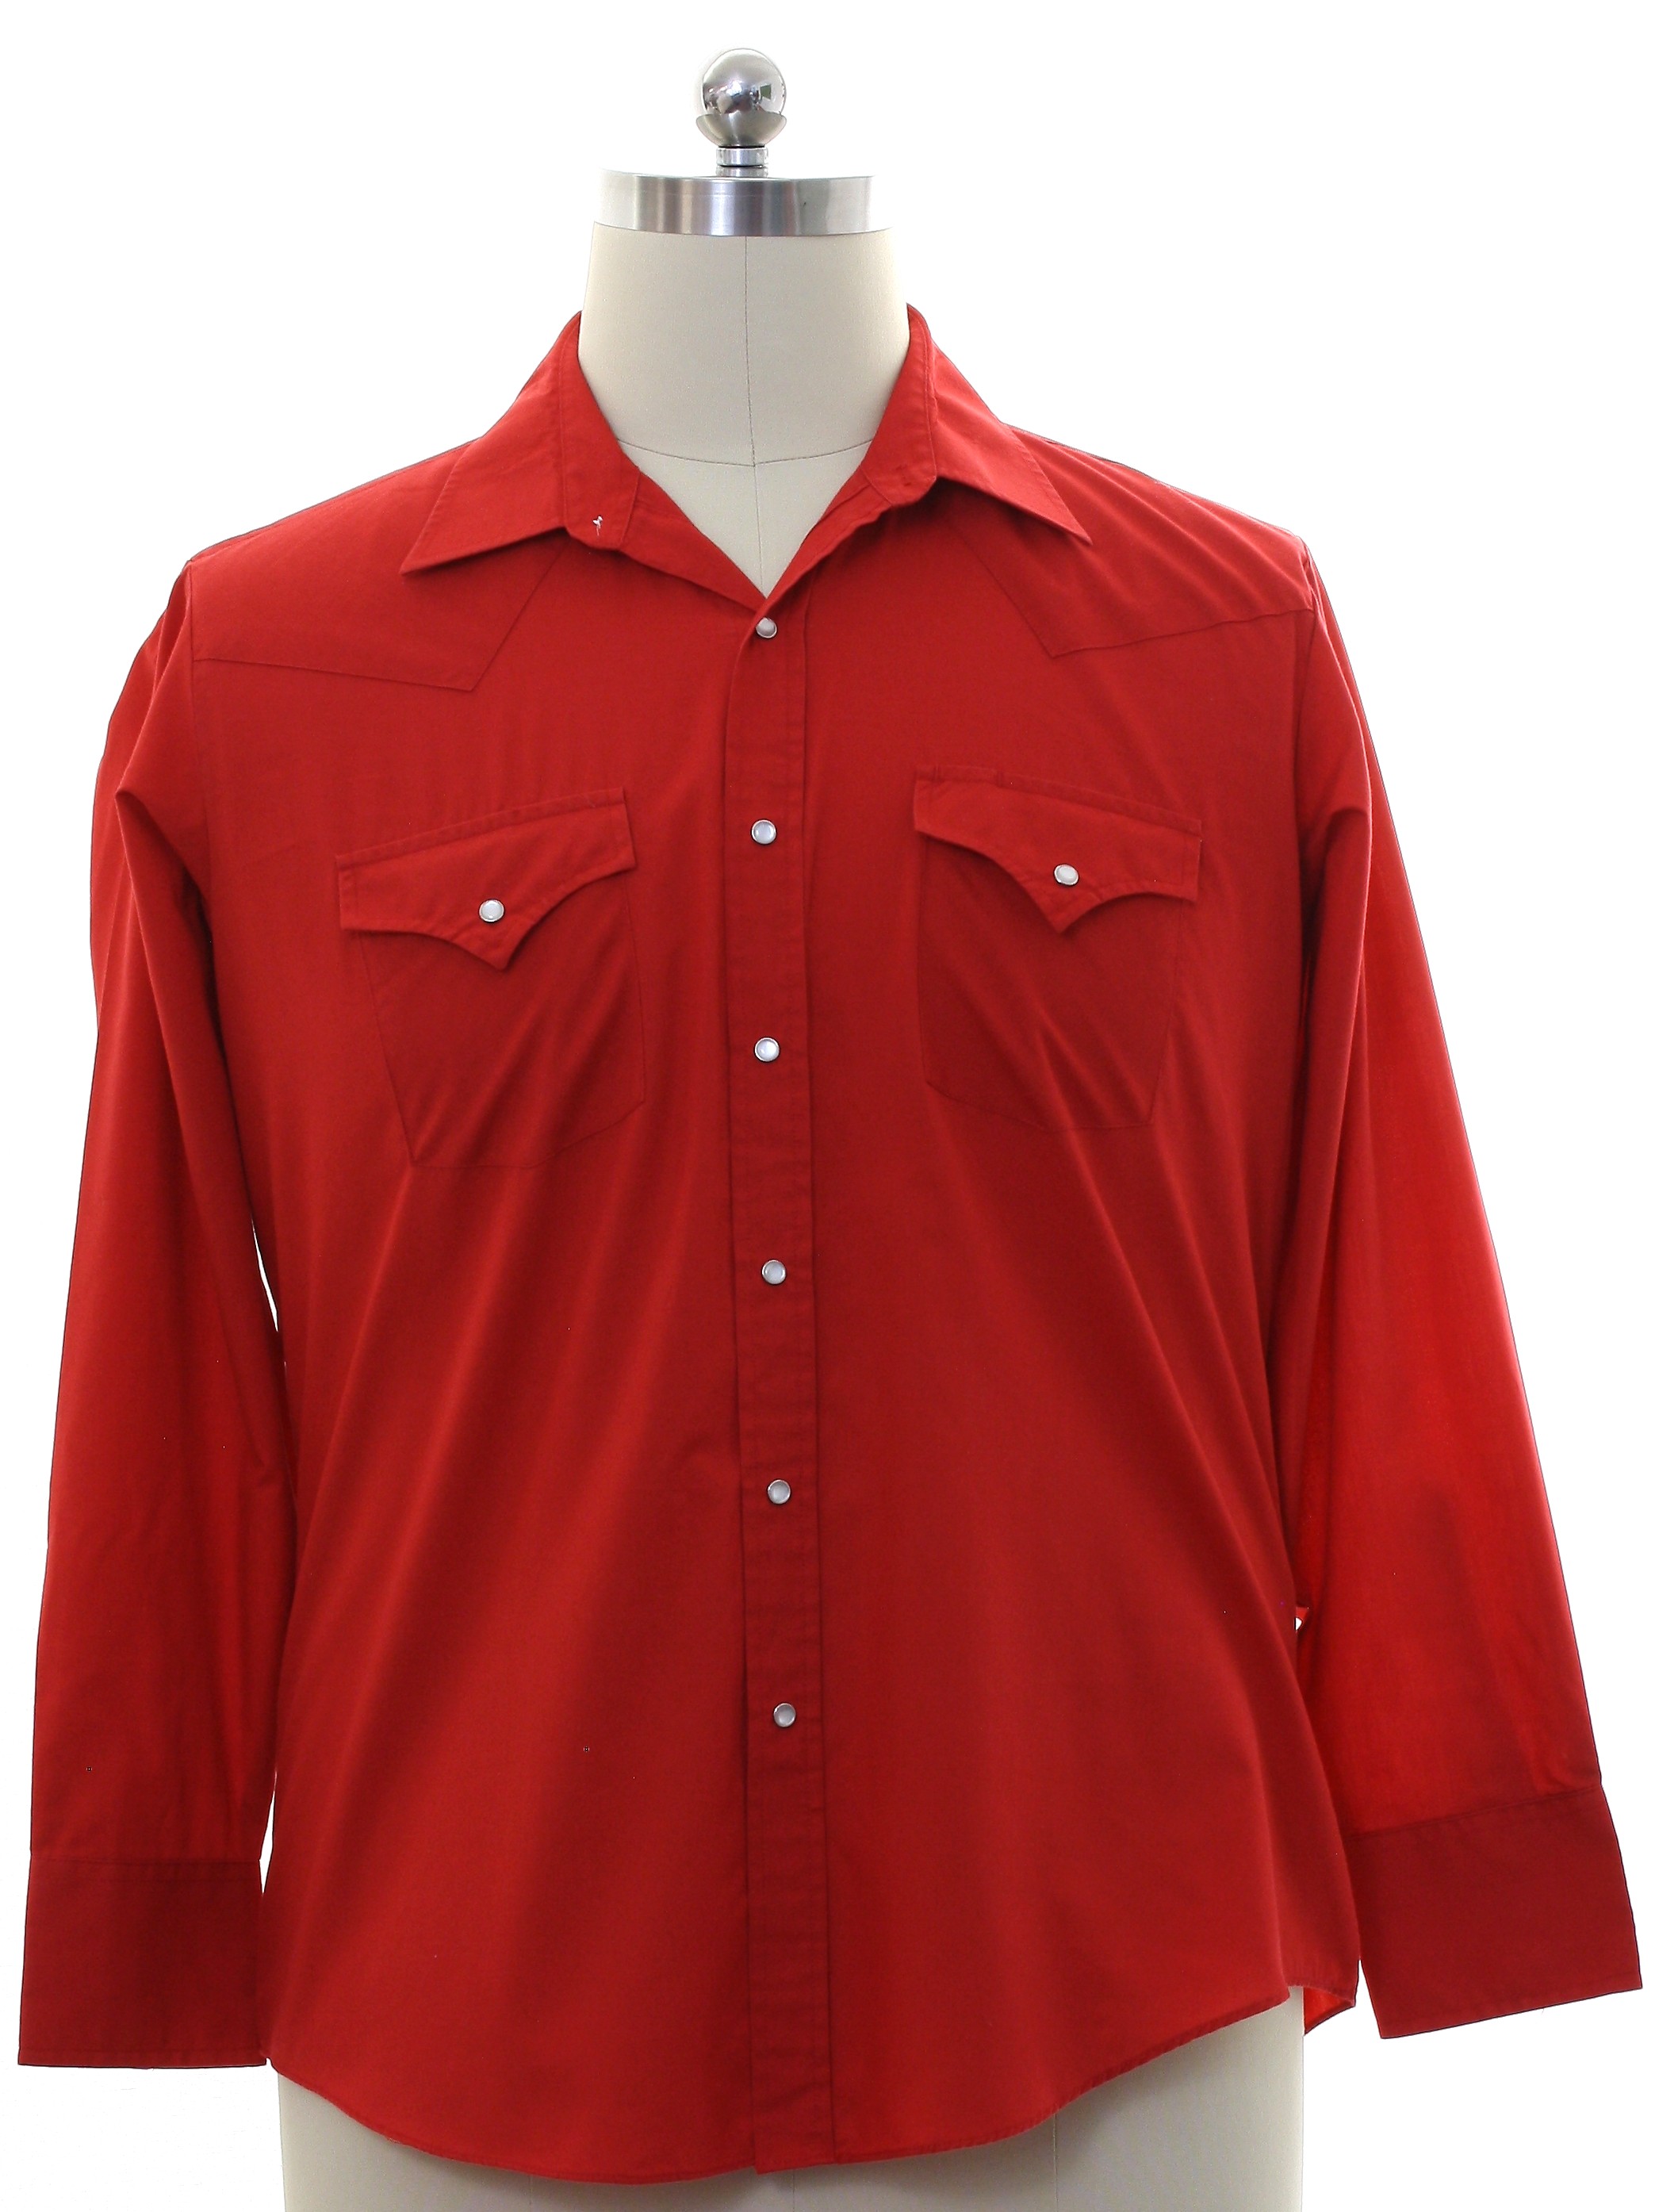 Western Shirt: 90s -Sheplers- Mens red background polyester cotton ...